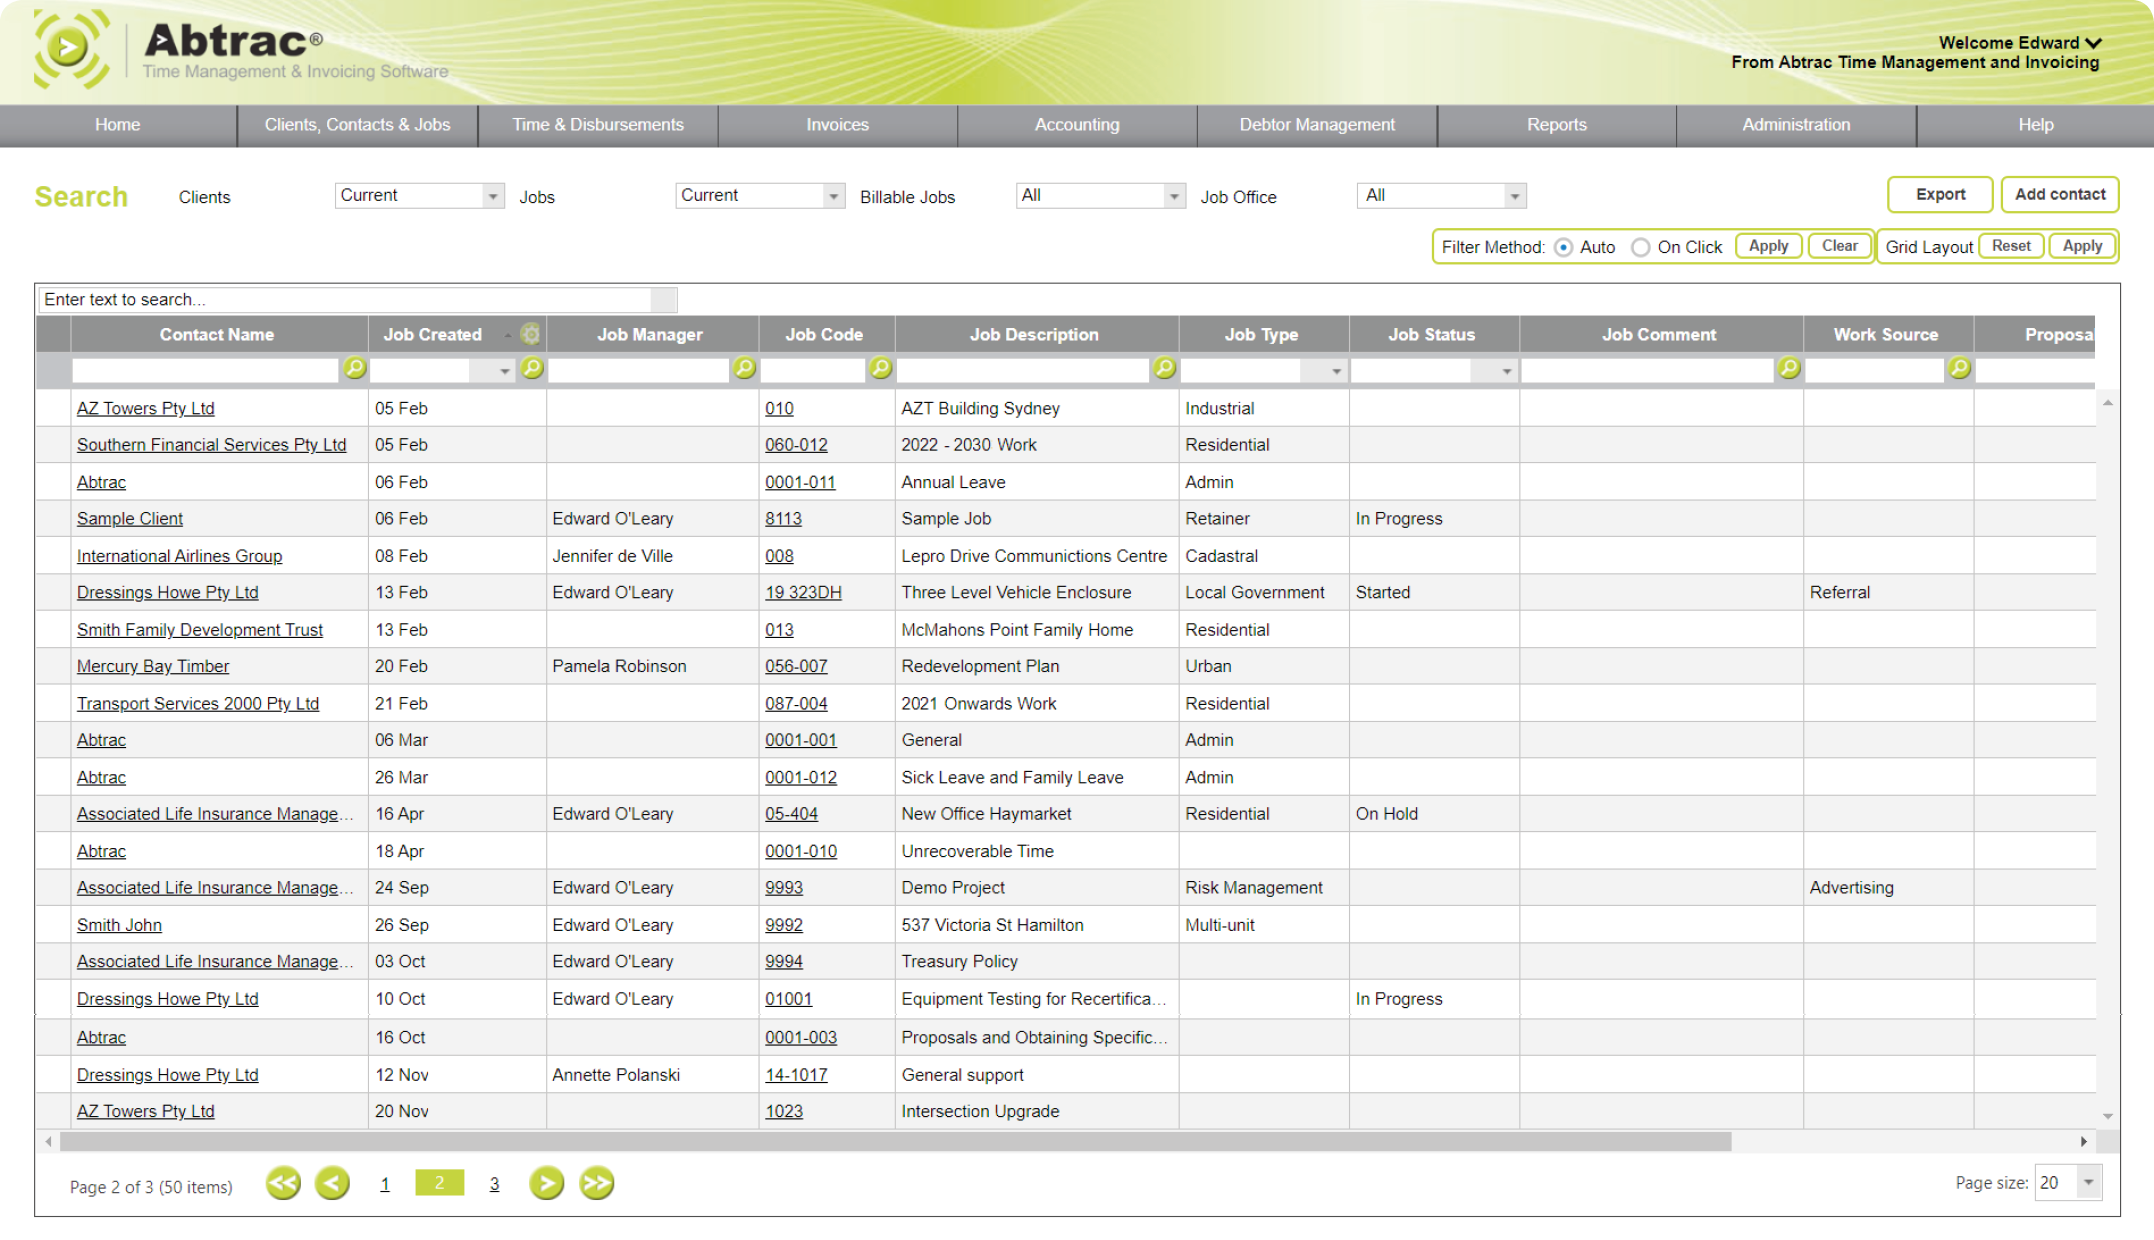 Abtrac Project Management Software - Clients, jobs search screen